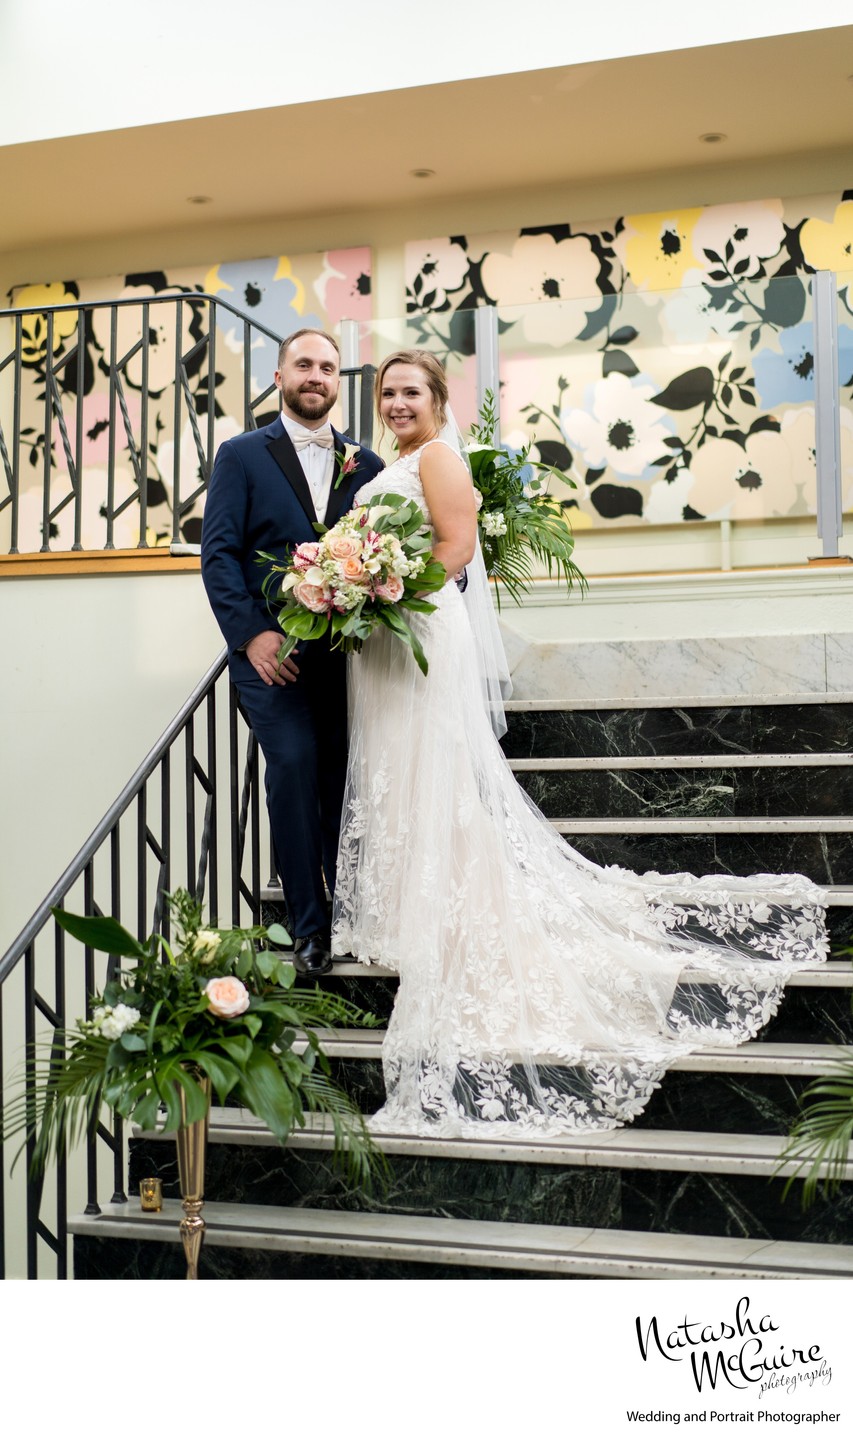 Couple on staircase at Majorette wedding venue